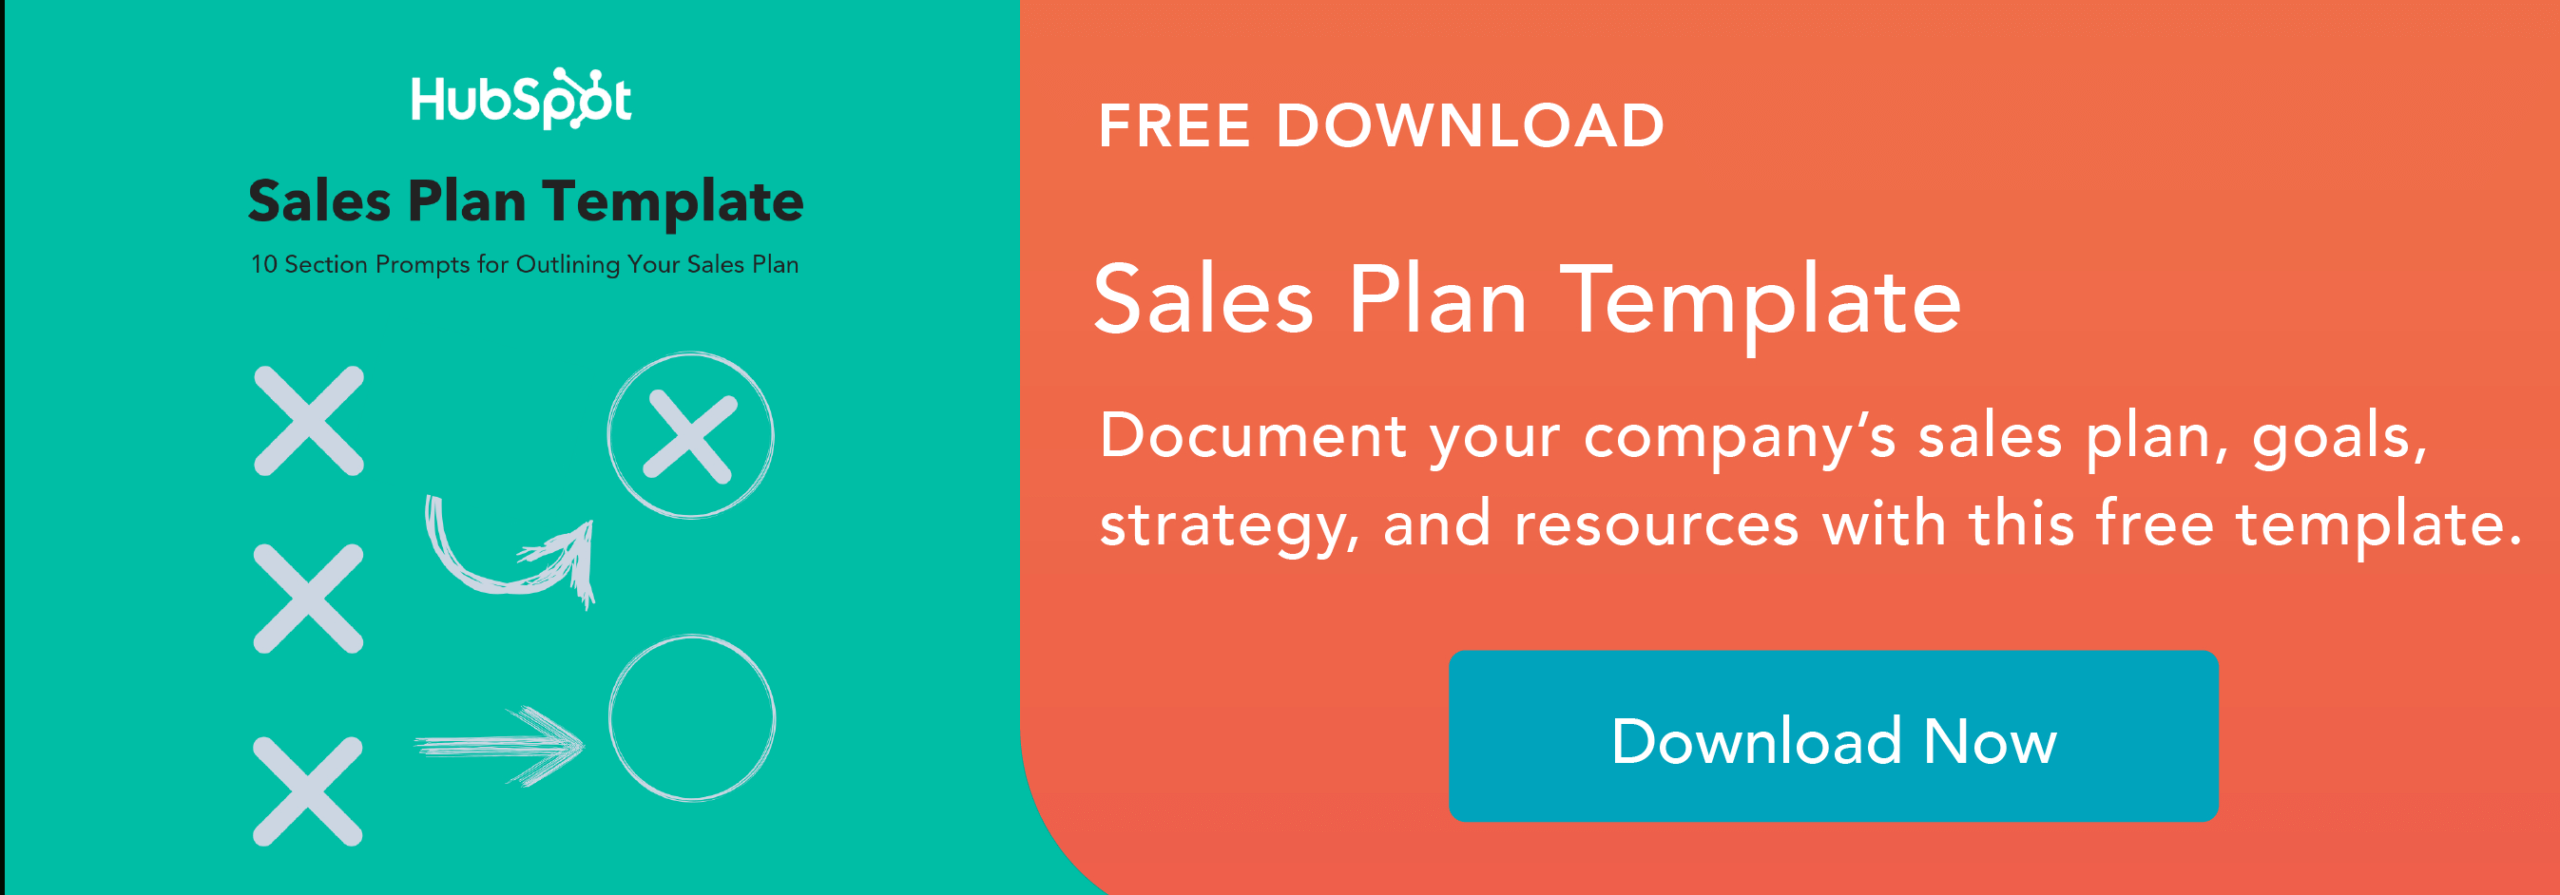 How To Create A Sales Plan: Guide + Template With Business Plan To Increase Sales Template